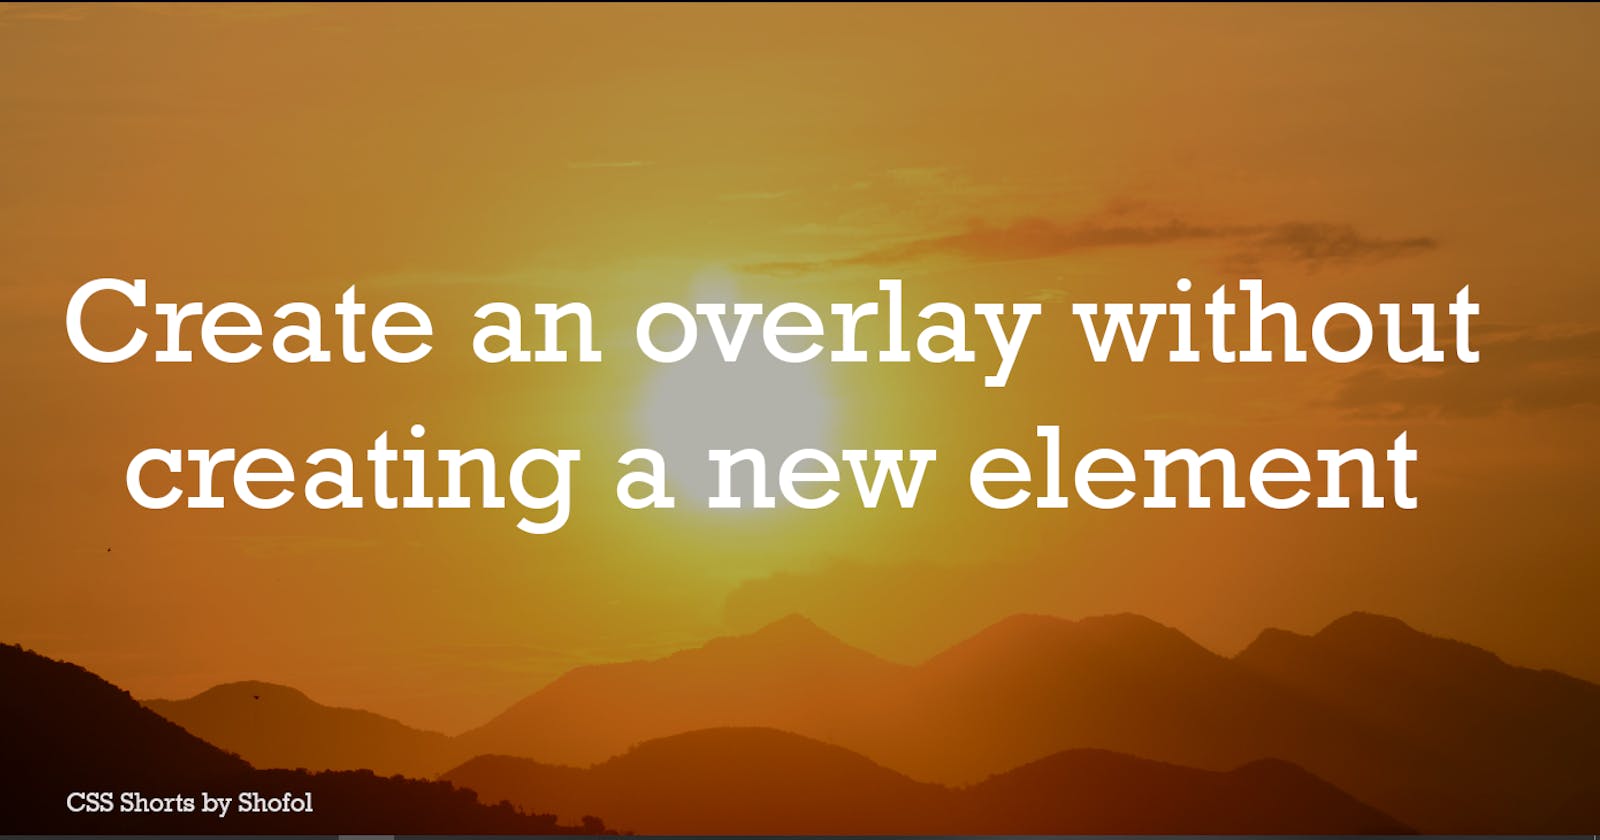 Create an overlay without creating a new element